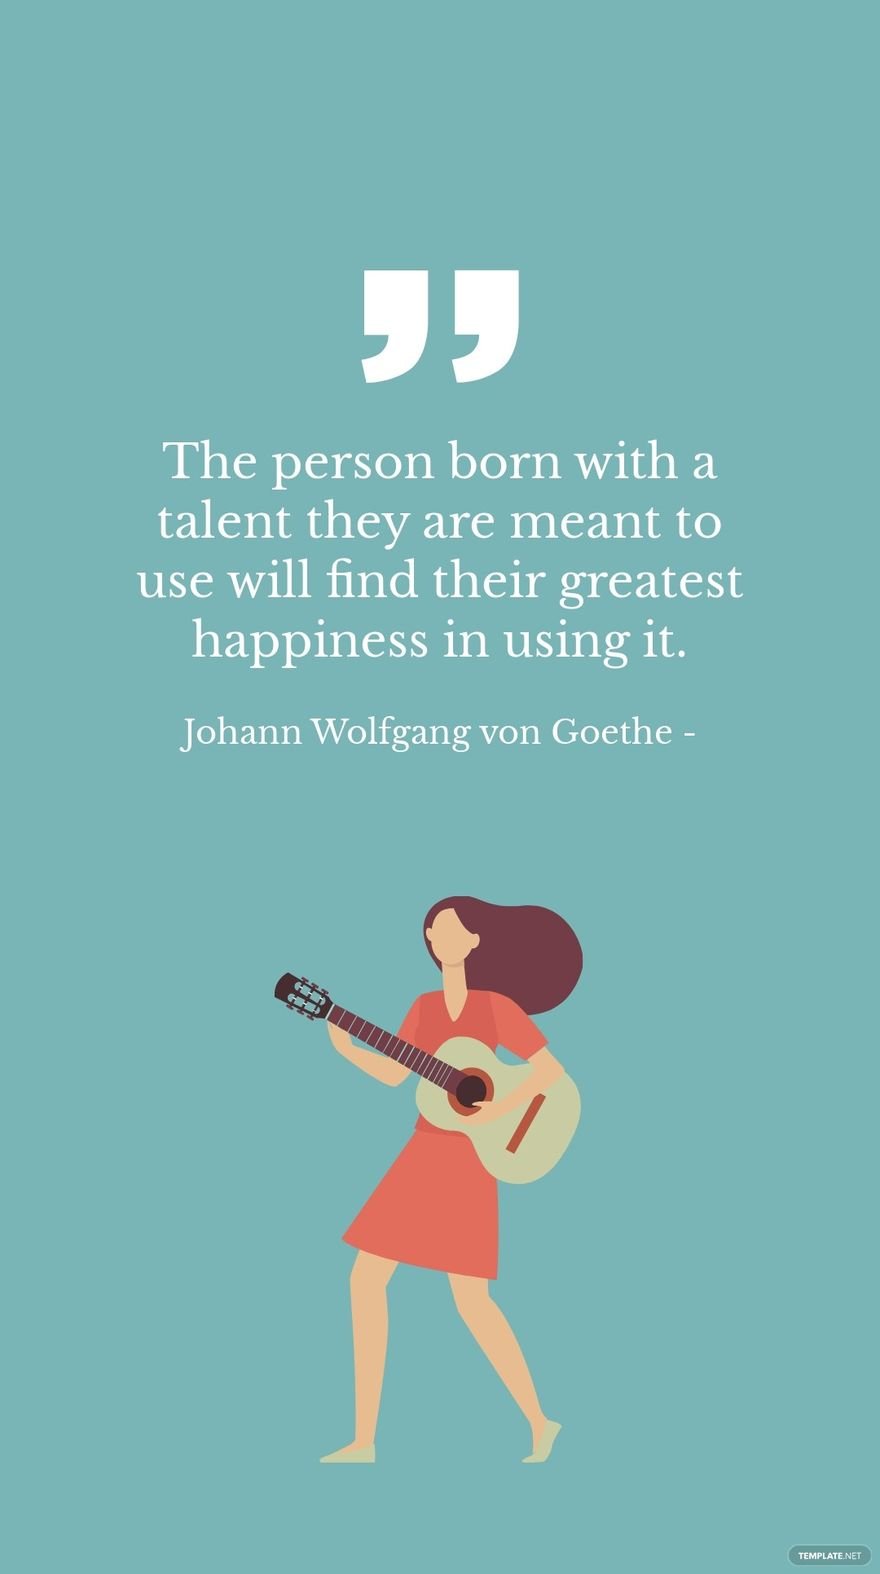 Johann Wolfgang von Goethe - The person born with a talent they are meant to use will find their greatest happiness in using it.